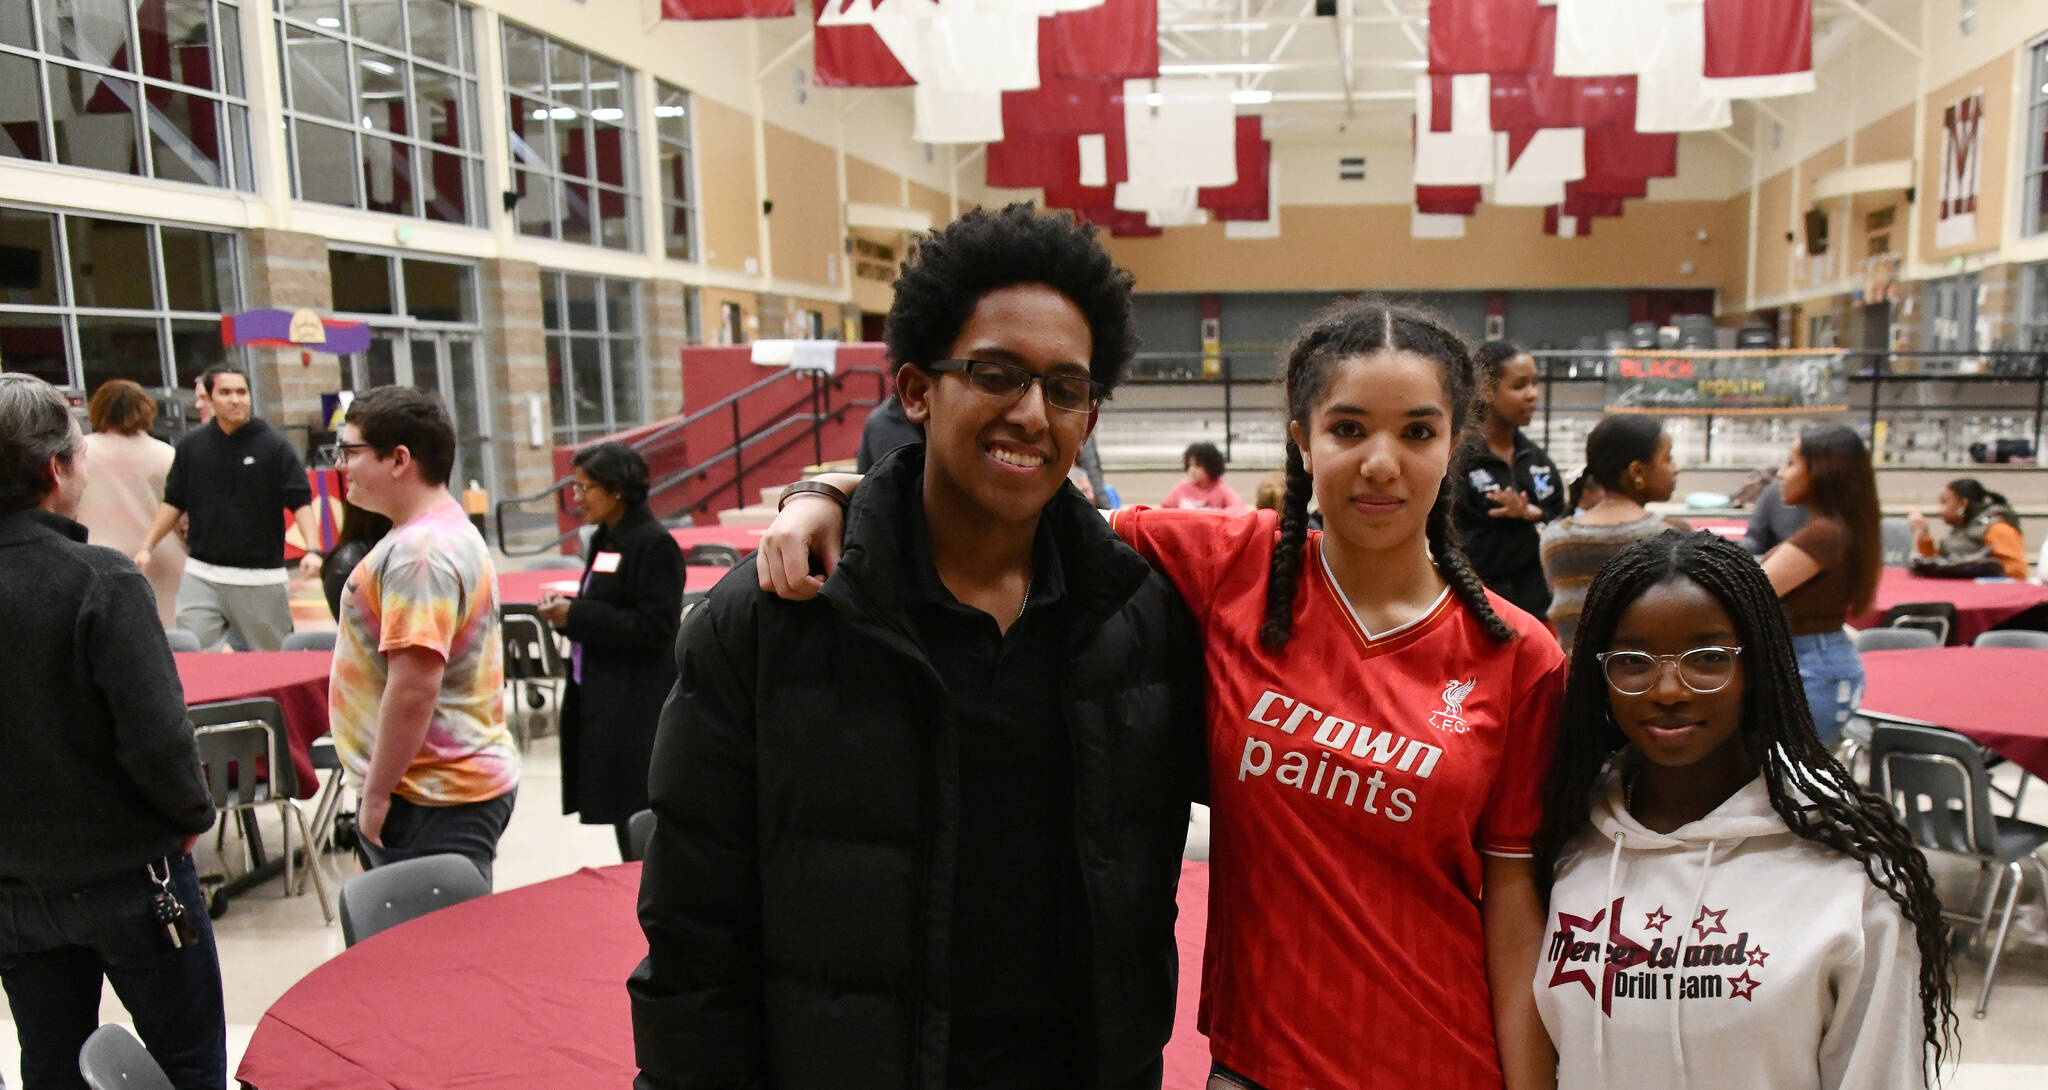 Andy Nystrom/ staff photo
From left to right, Mercer Island High School Black Student Union members Tewodros (Teddy) Sanchez-Alemu, Jada Jorgensen and Omolara Olusanya gather at the union’s community dinner on Feb. 7 in the school commons.